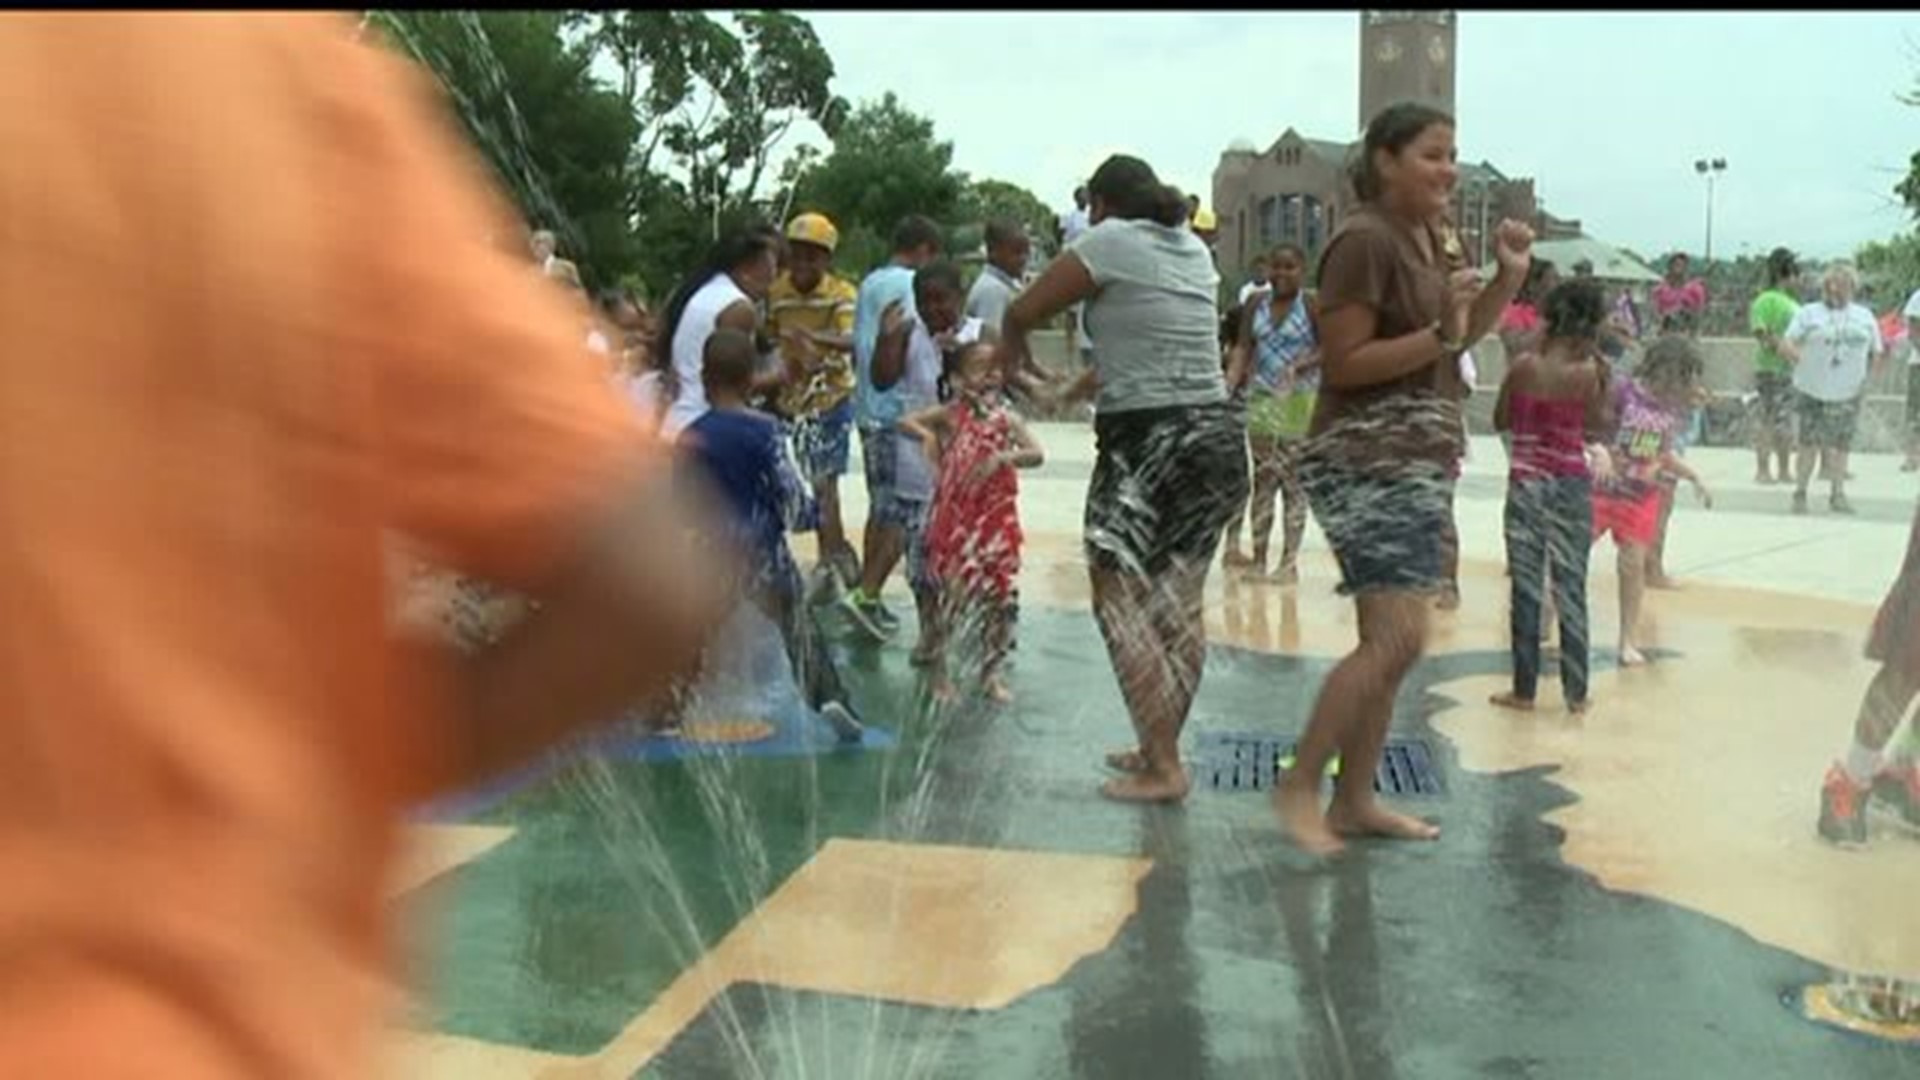 York unveils first city playground to have water feature